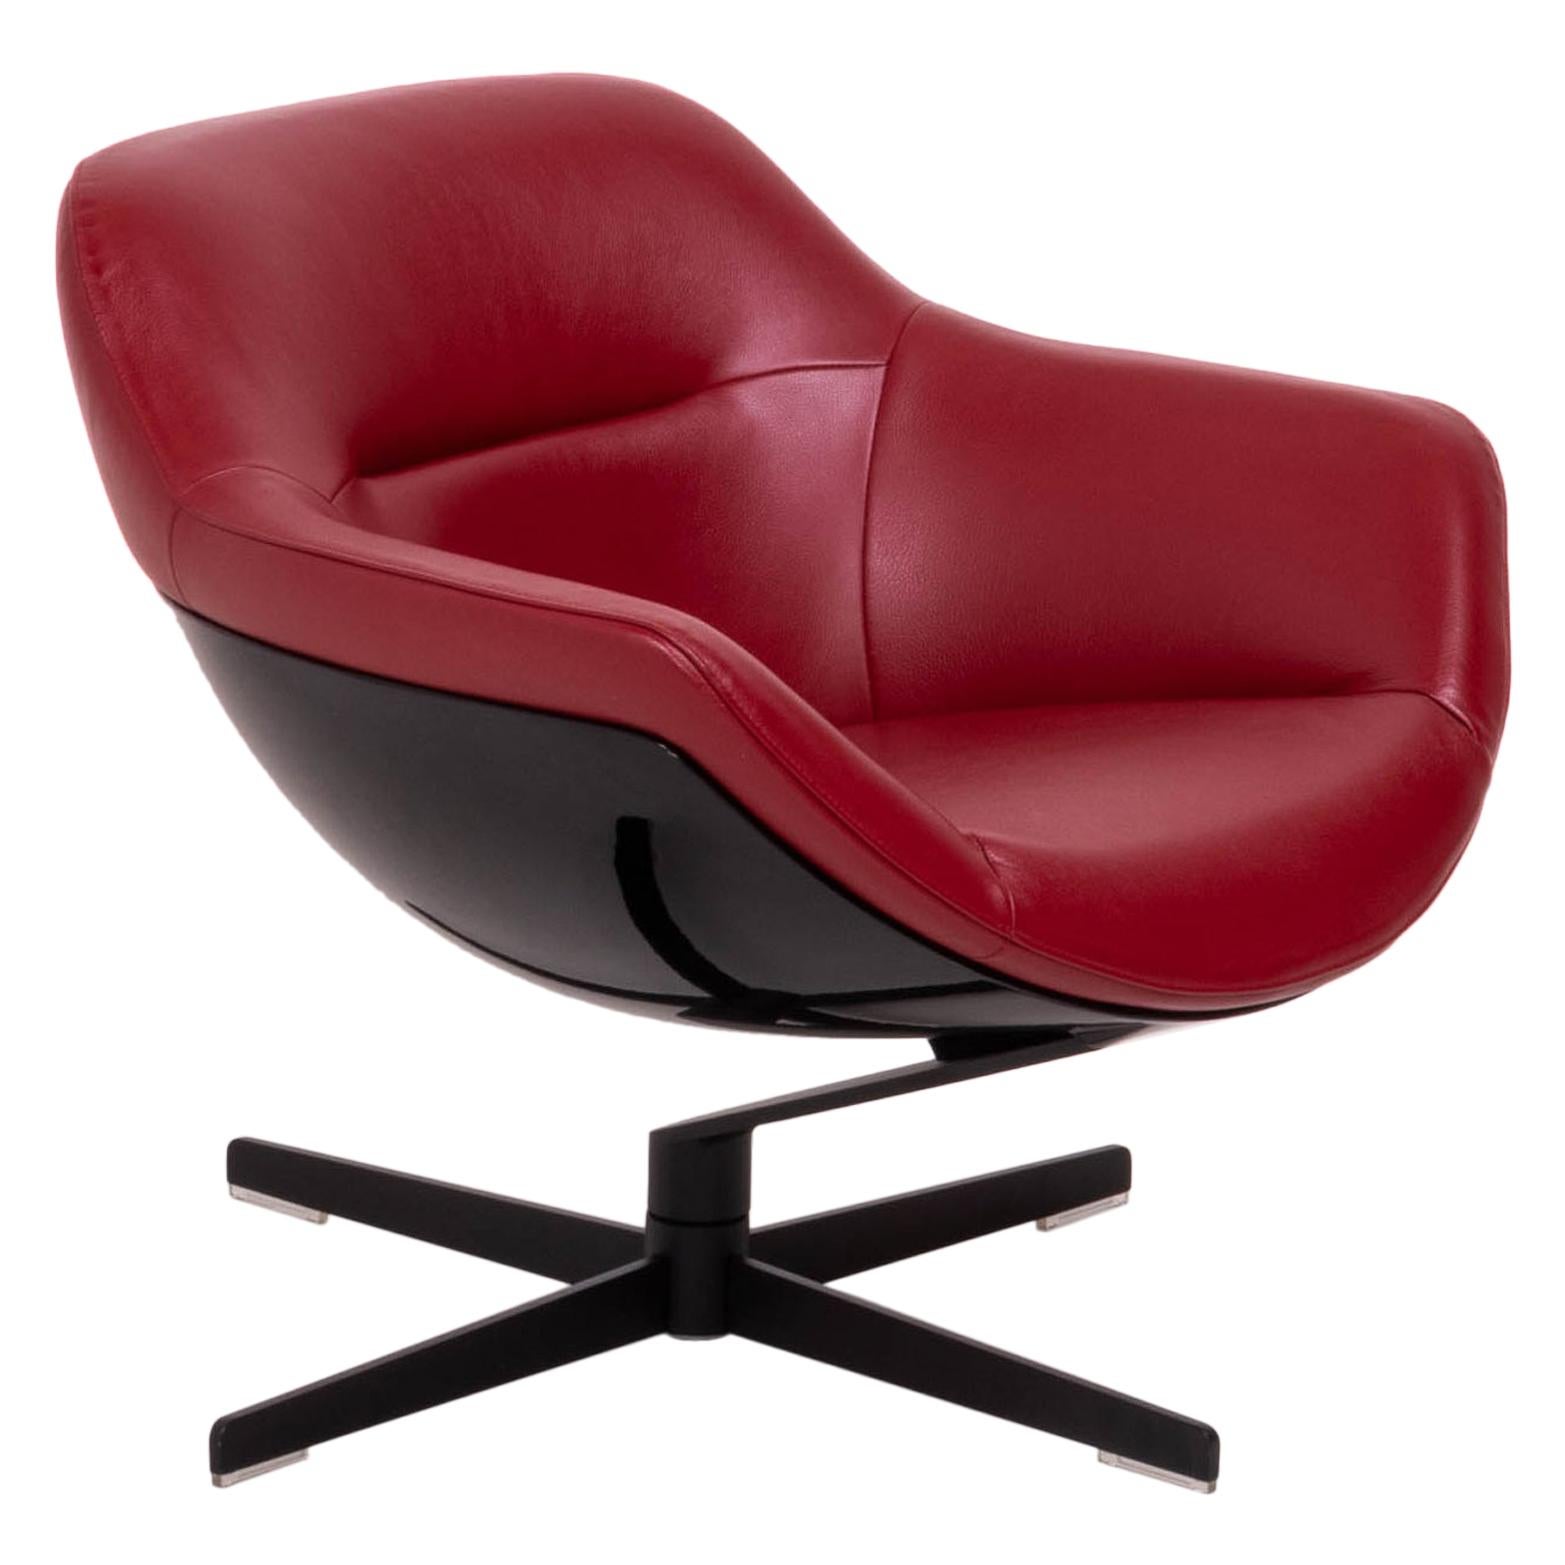 Cassina by Jean-Marie Massaud, 277 Auckland Red Leather Lounge Swivel Armchair